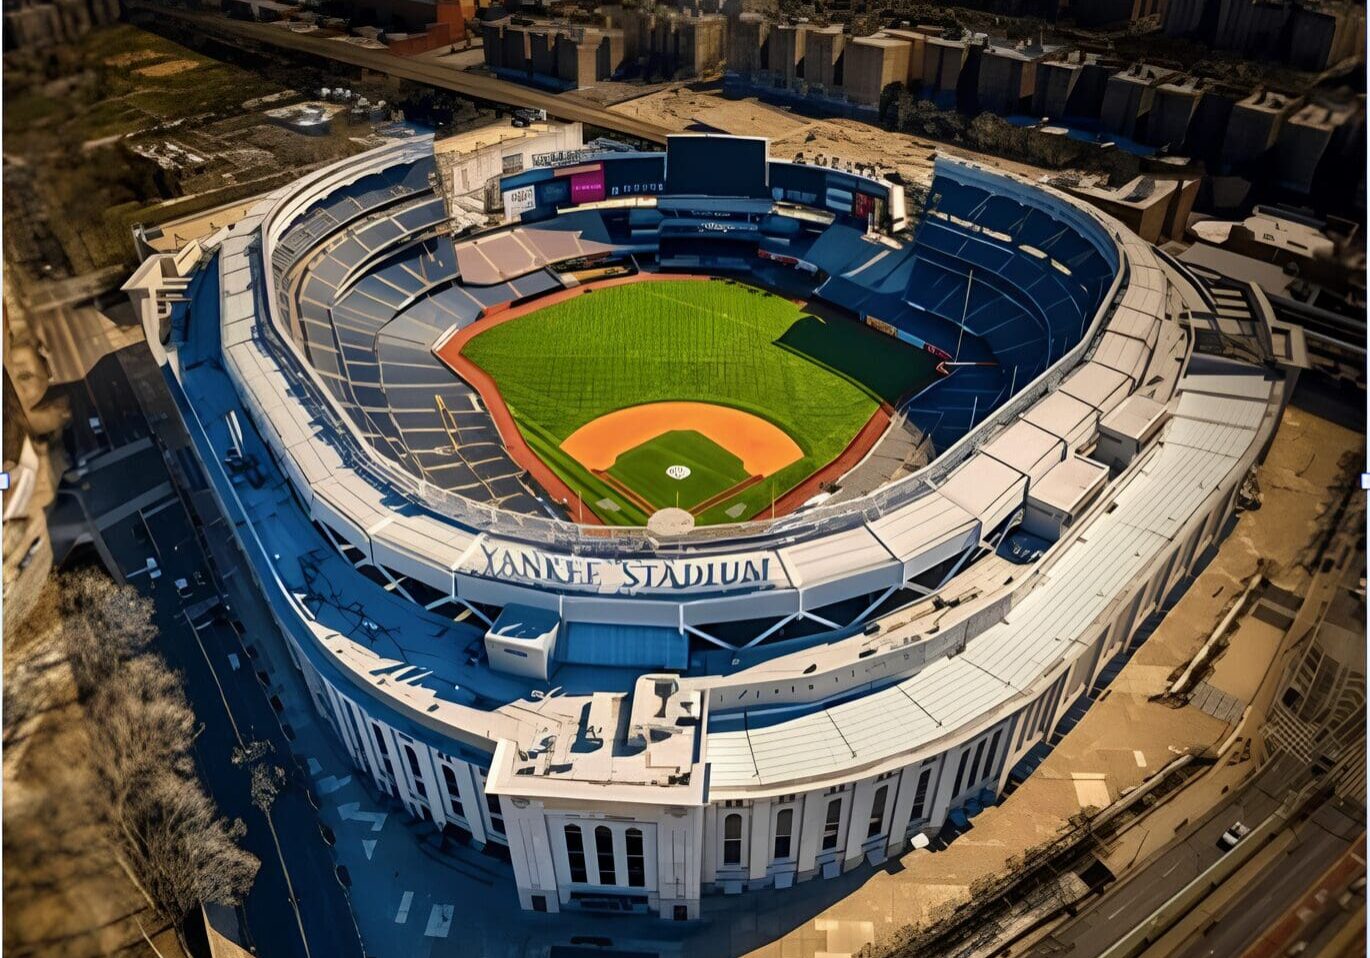 An aerial view of a baseball stadium with the field in the middle.